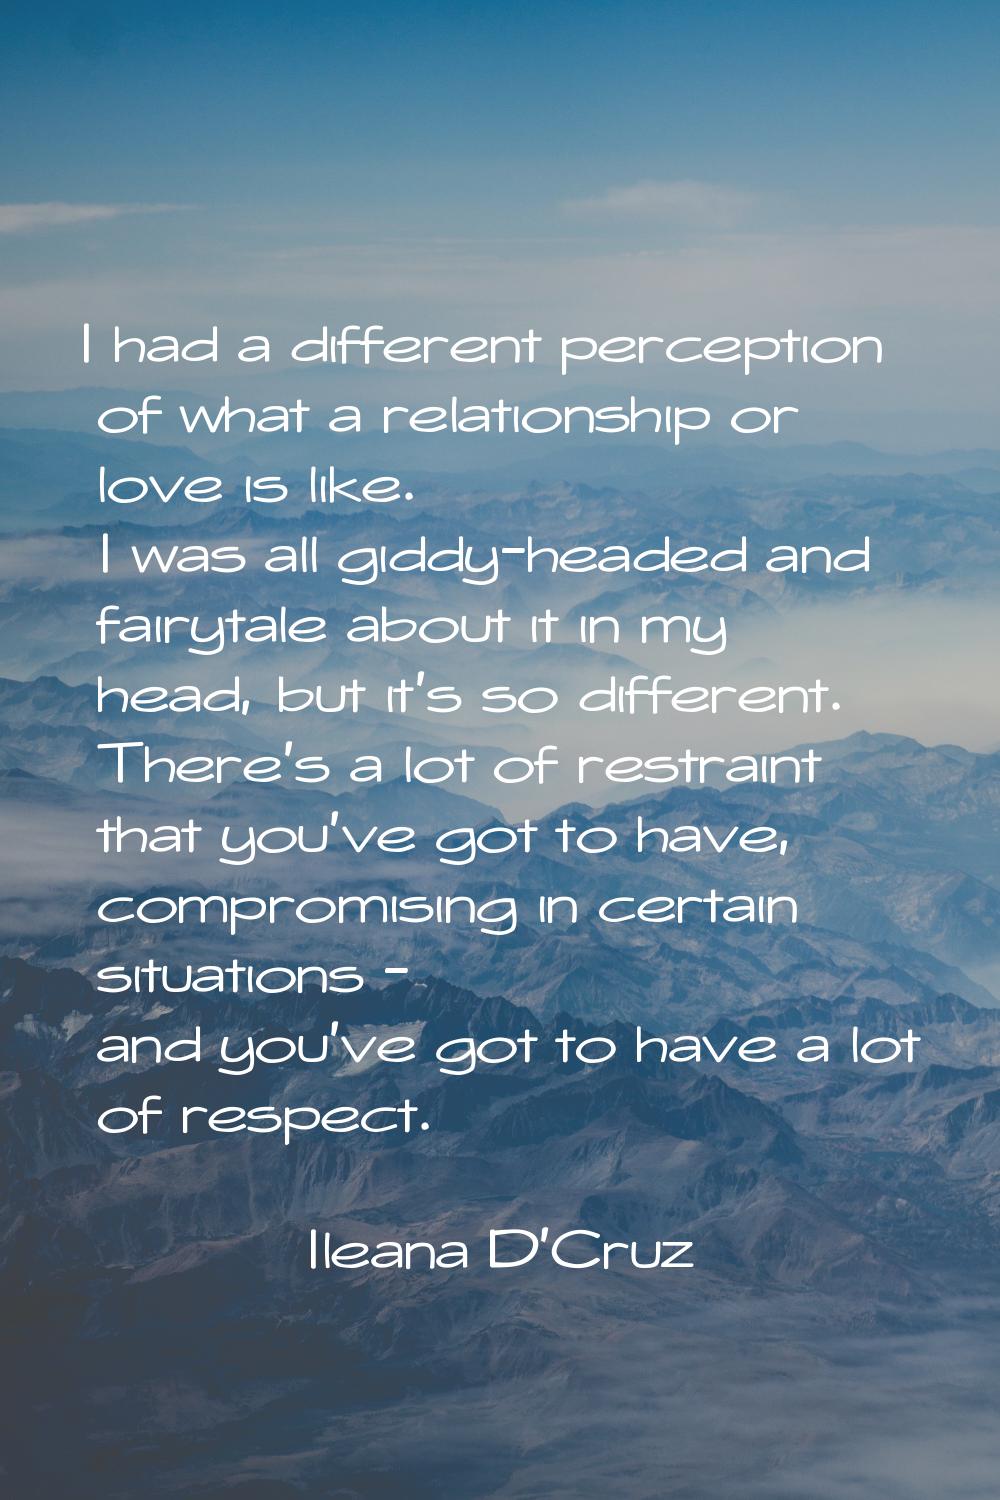 I had a different perception of what a relationship or love is like. I was all giddy-headed and fai